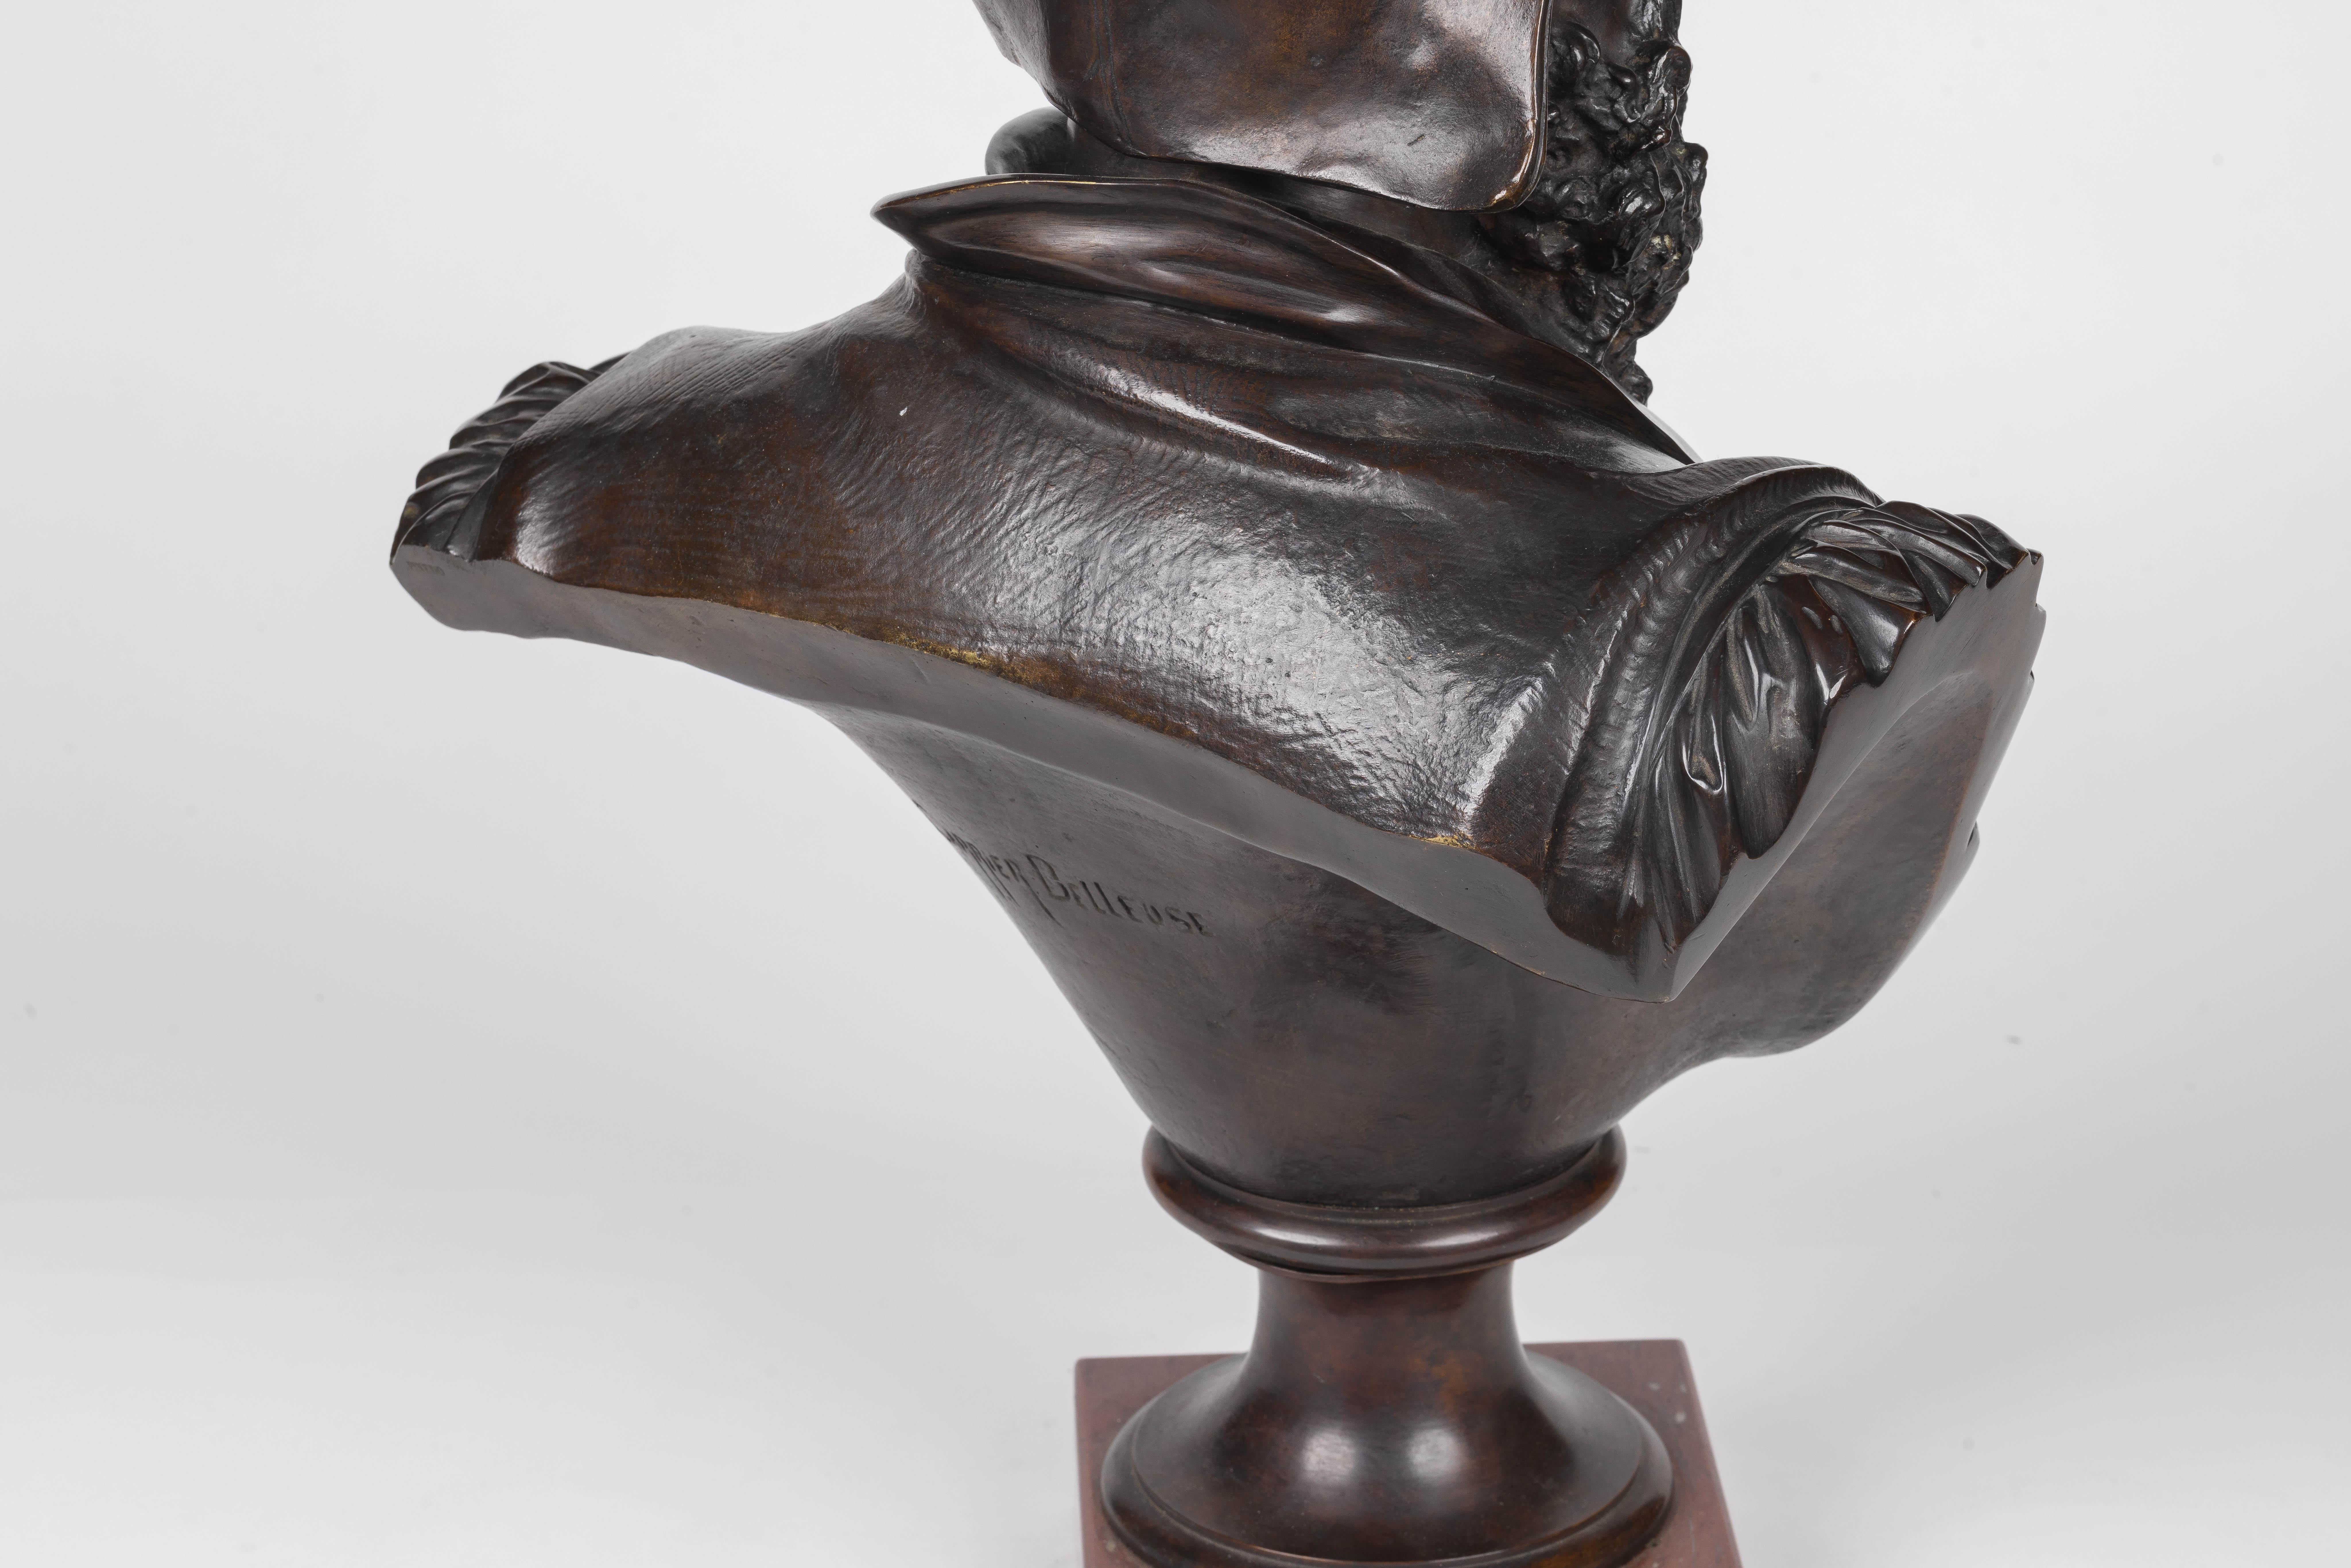 Albert-Ernest Carrier-Belleuse, A Rare and Important Bronze Bust of Michelangelo For Sale 6